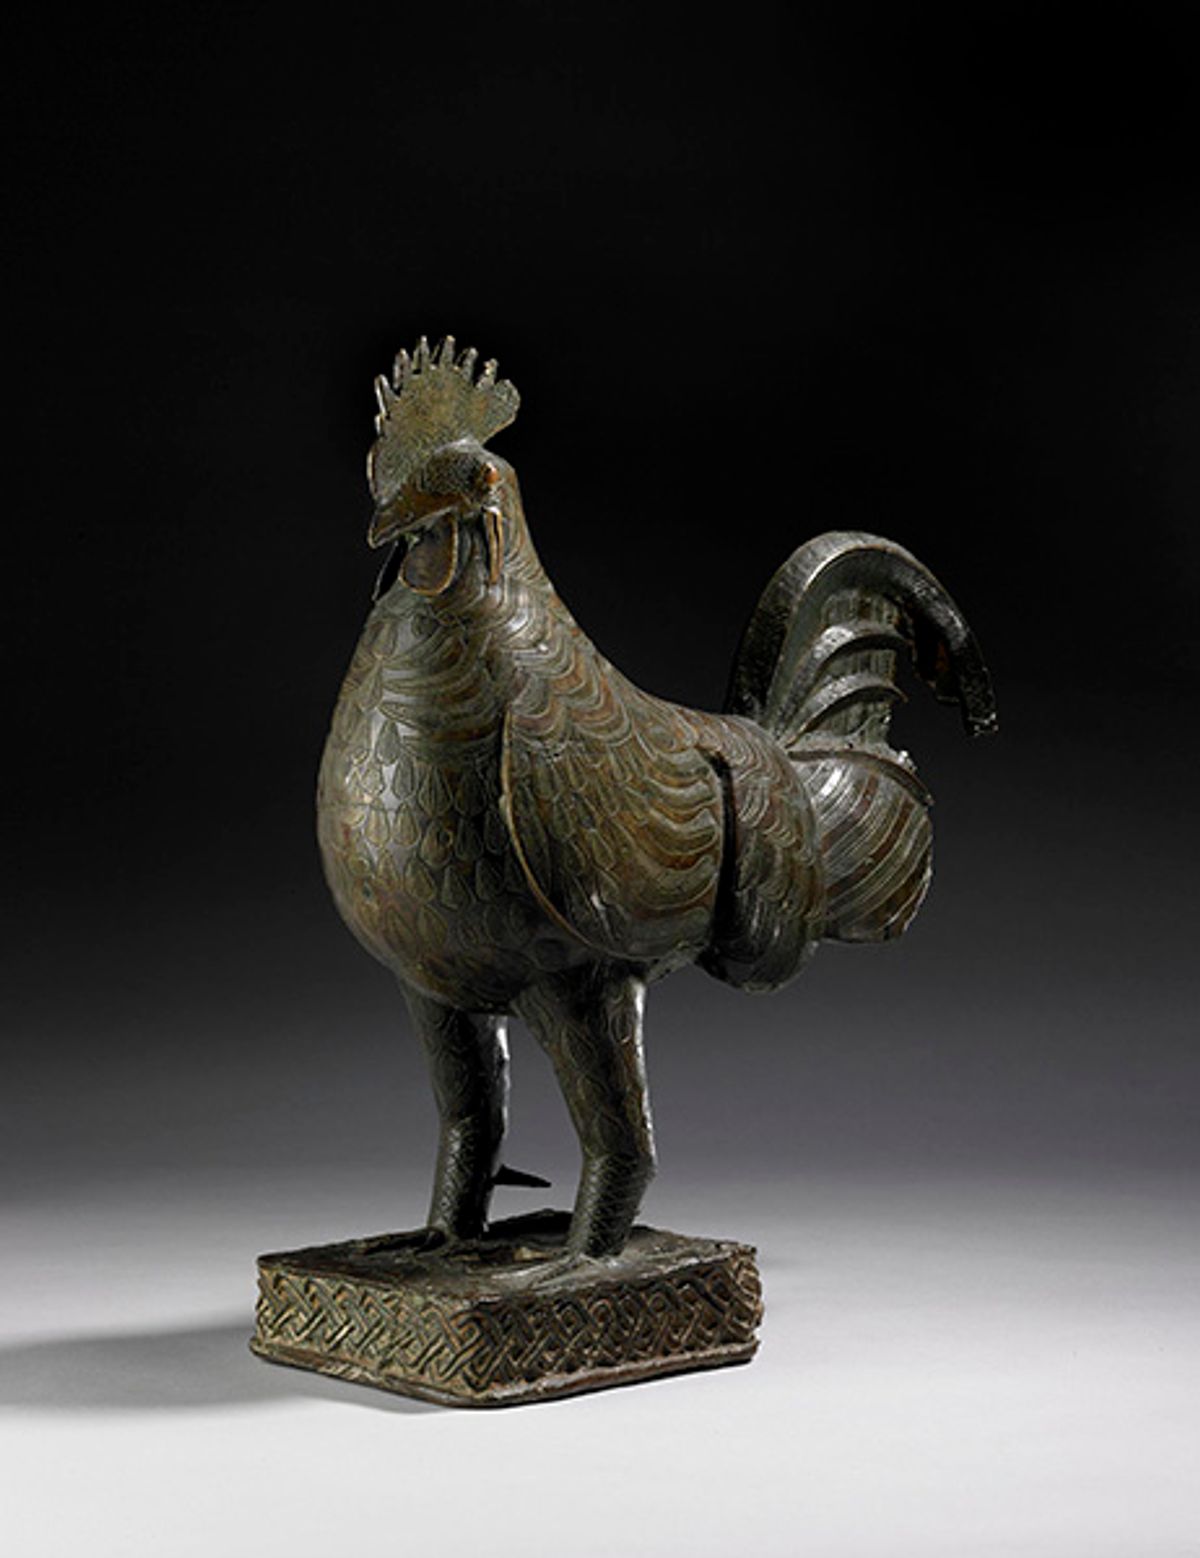 A 18th-century cast brass figure of a cockerel with punched feather decoration made in Benin City and in the British Museum's collection © The Trustees of the British Museum





